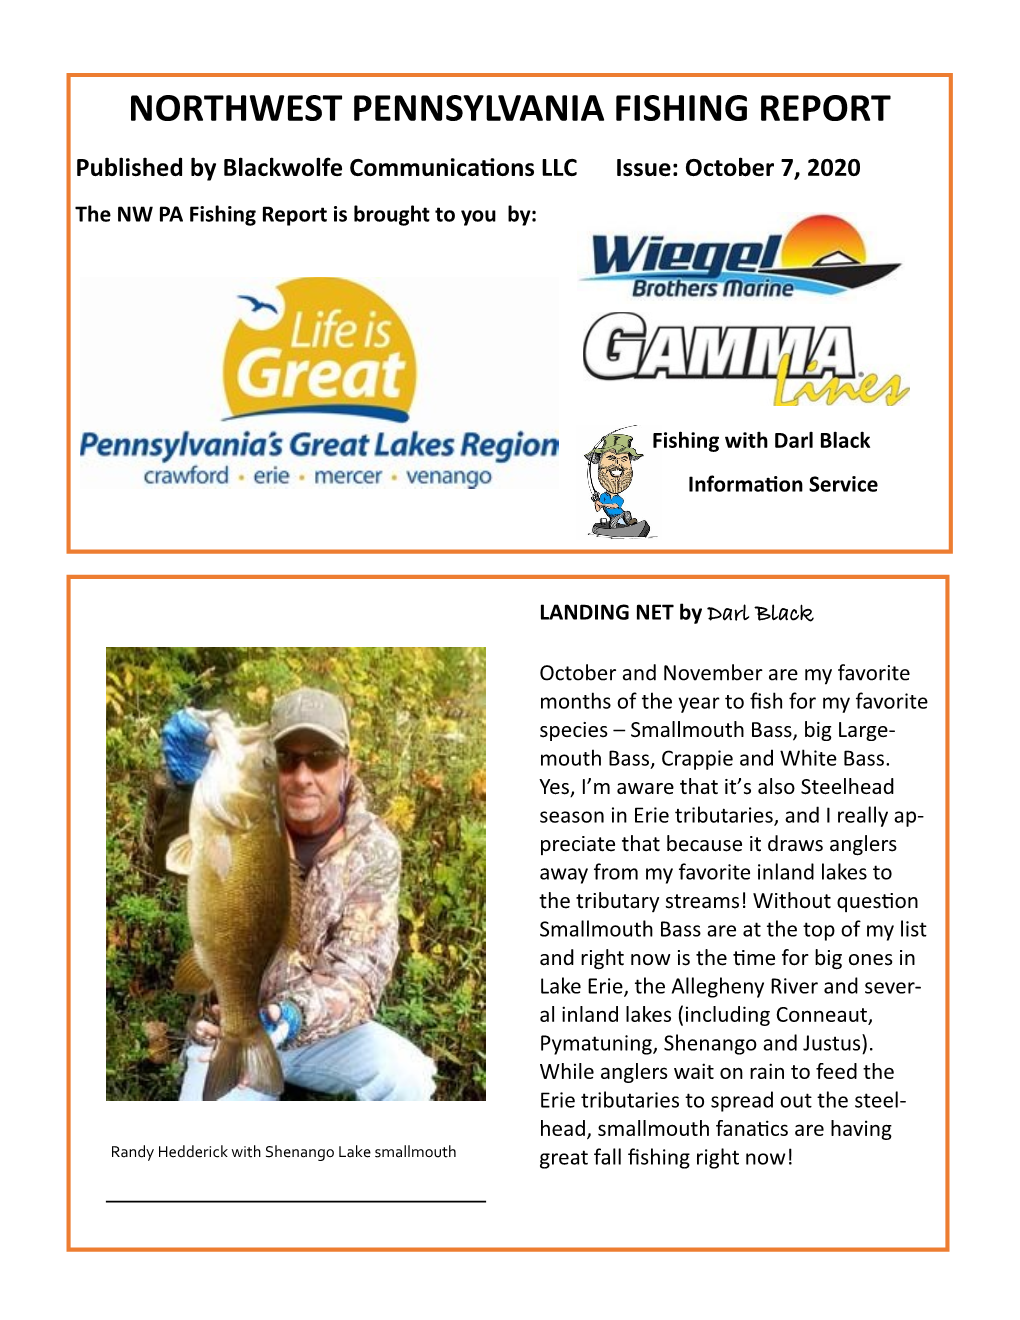 NORTHWEST PENNSYLVANIA FISHING REPORT Published by Blackwolfe Communications LLC Issue: October 7, 2020 the NW PA Fishing Report Is Brought to You By